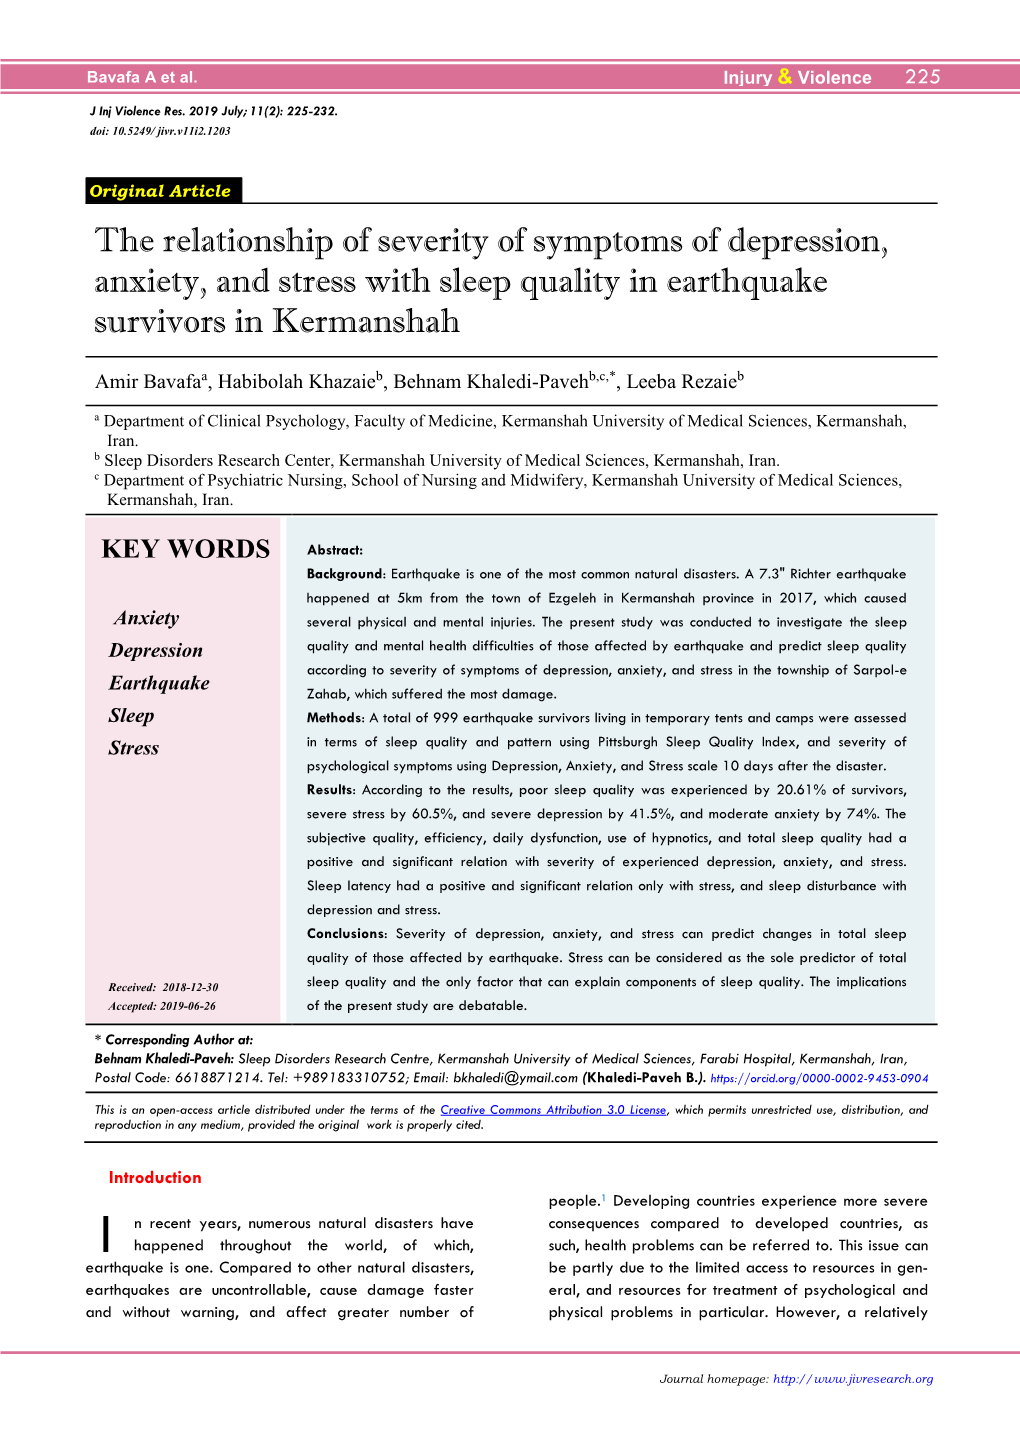 The Relationship of Severity of Symptoms of Depression, Anxiety, and Stress with Sleep Quality in Earthquake Survivors in Kermanshah